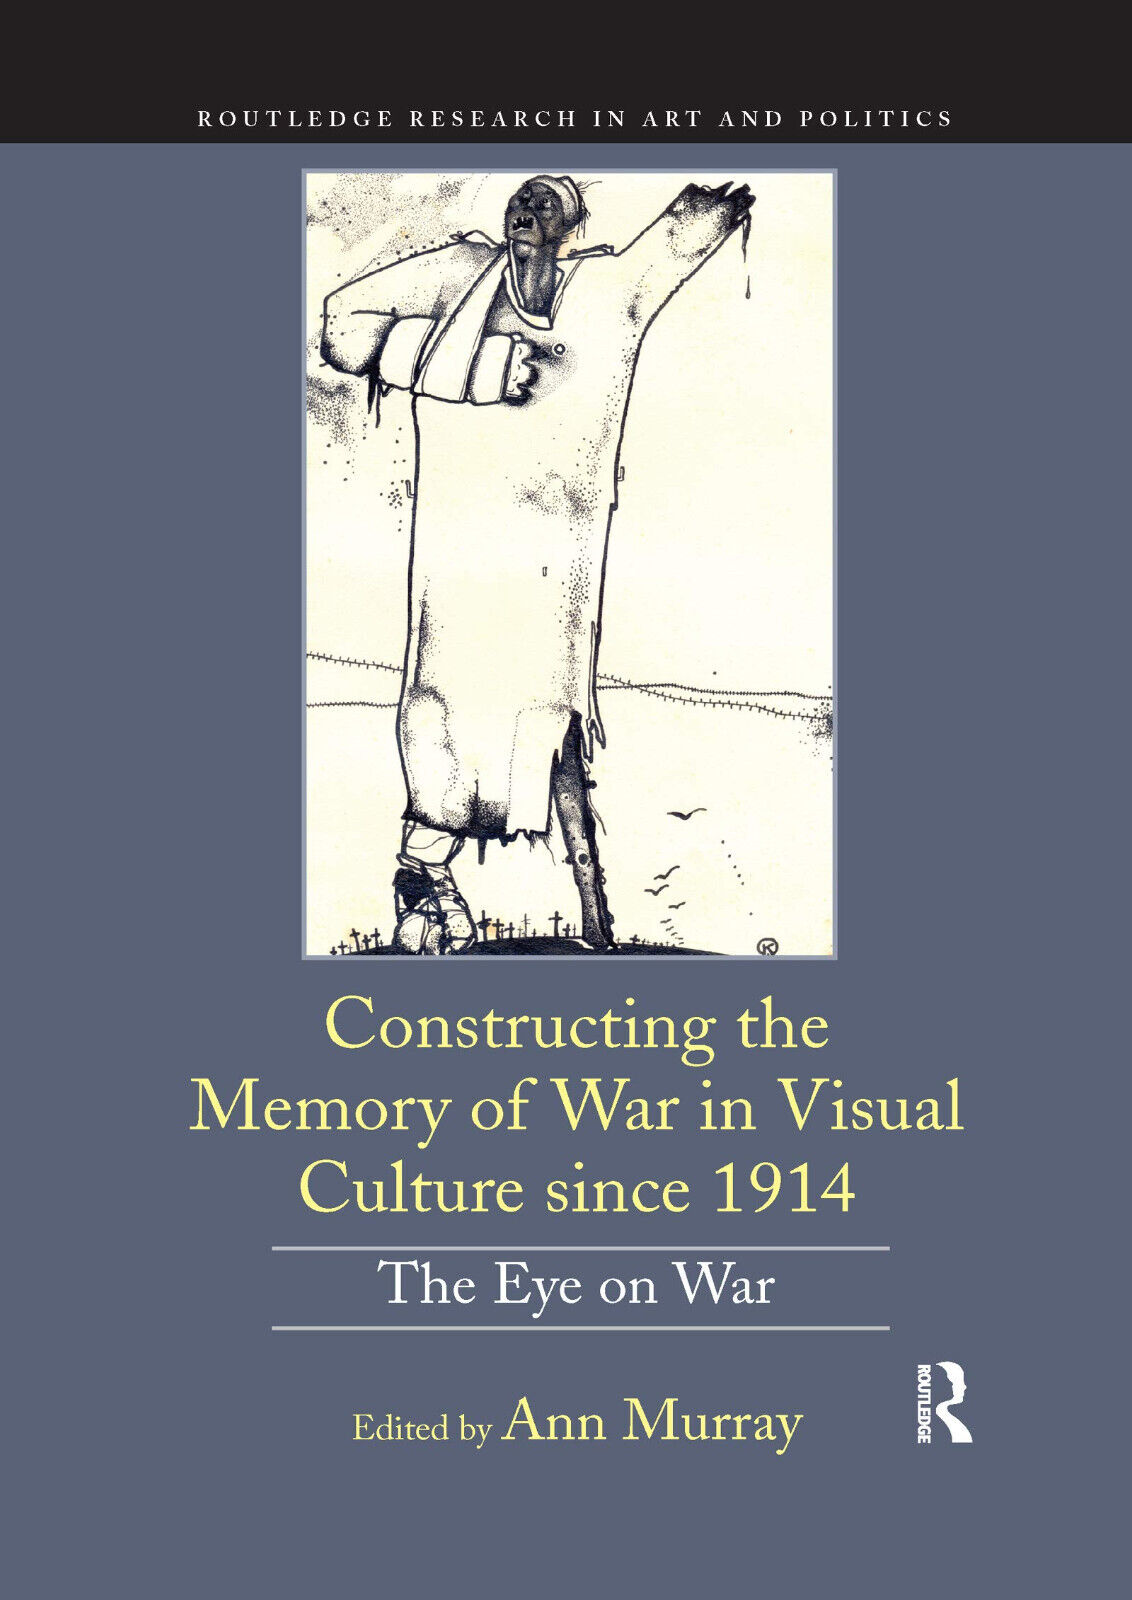 Constructing The Memory Of War In Visual Culture Since 1914 - Ann Murray - 2021 libro usato